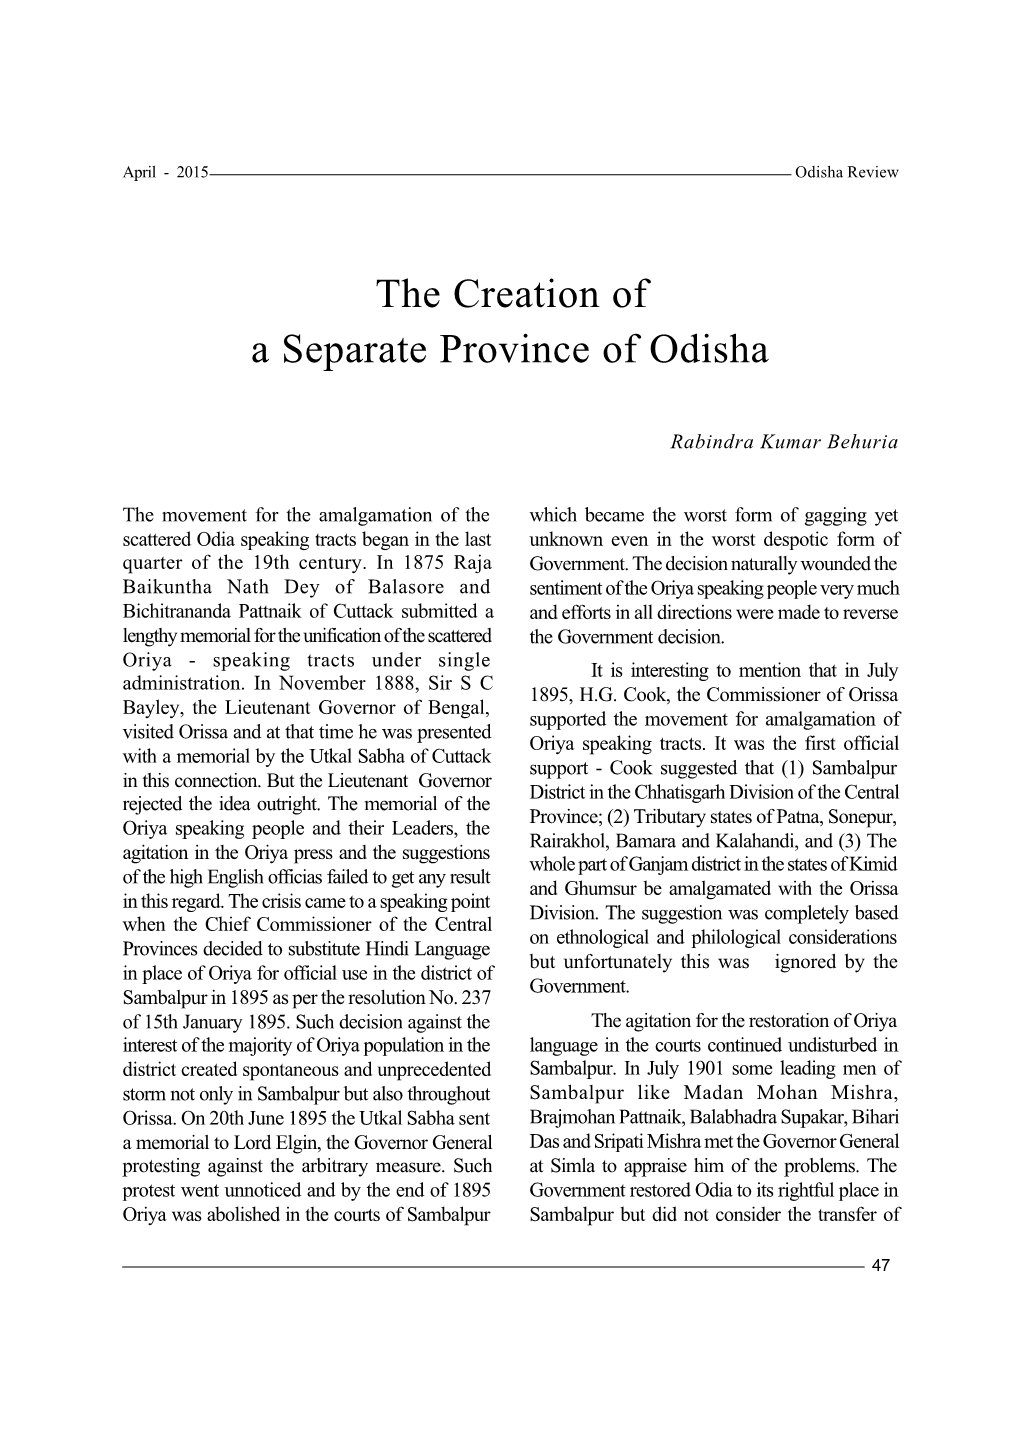 The Creation of a Separate Province of Odisha